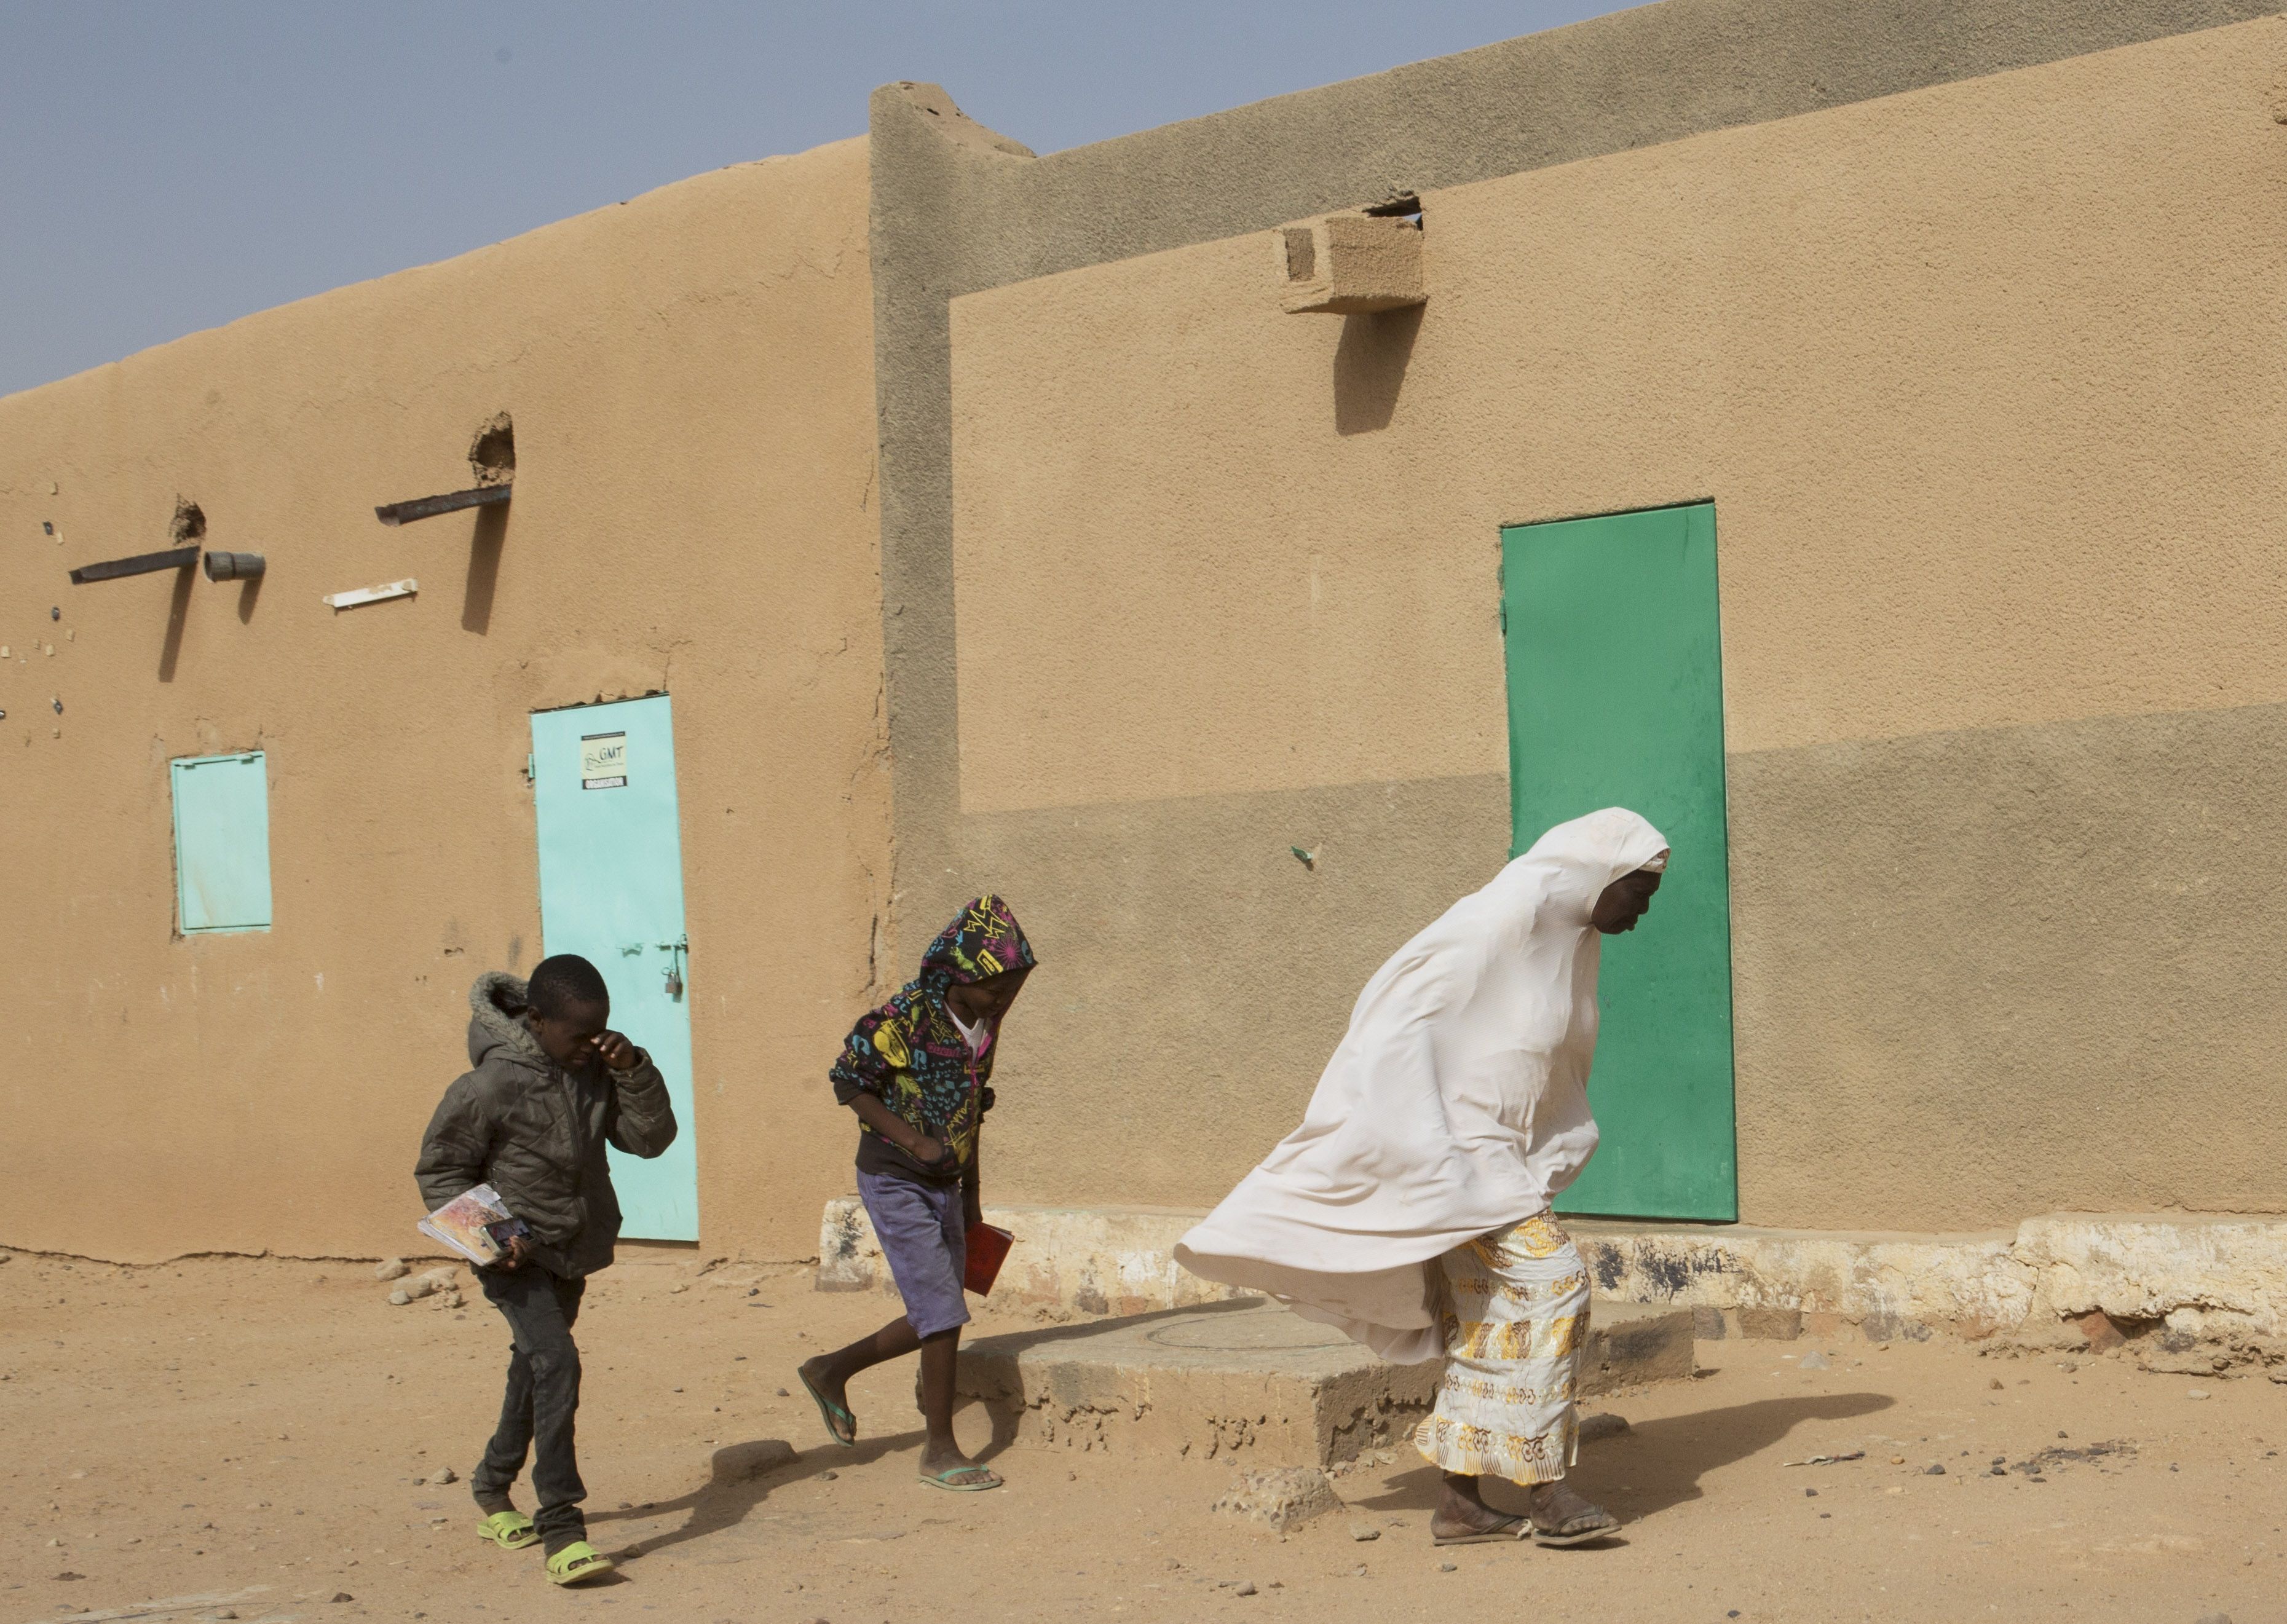 A woman and two children walk during blowing winds in Agadez, Niger, Jan. 15, 2018. Image by Joe Penney. Niger, 2018.